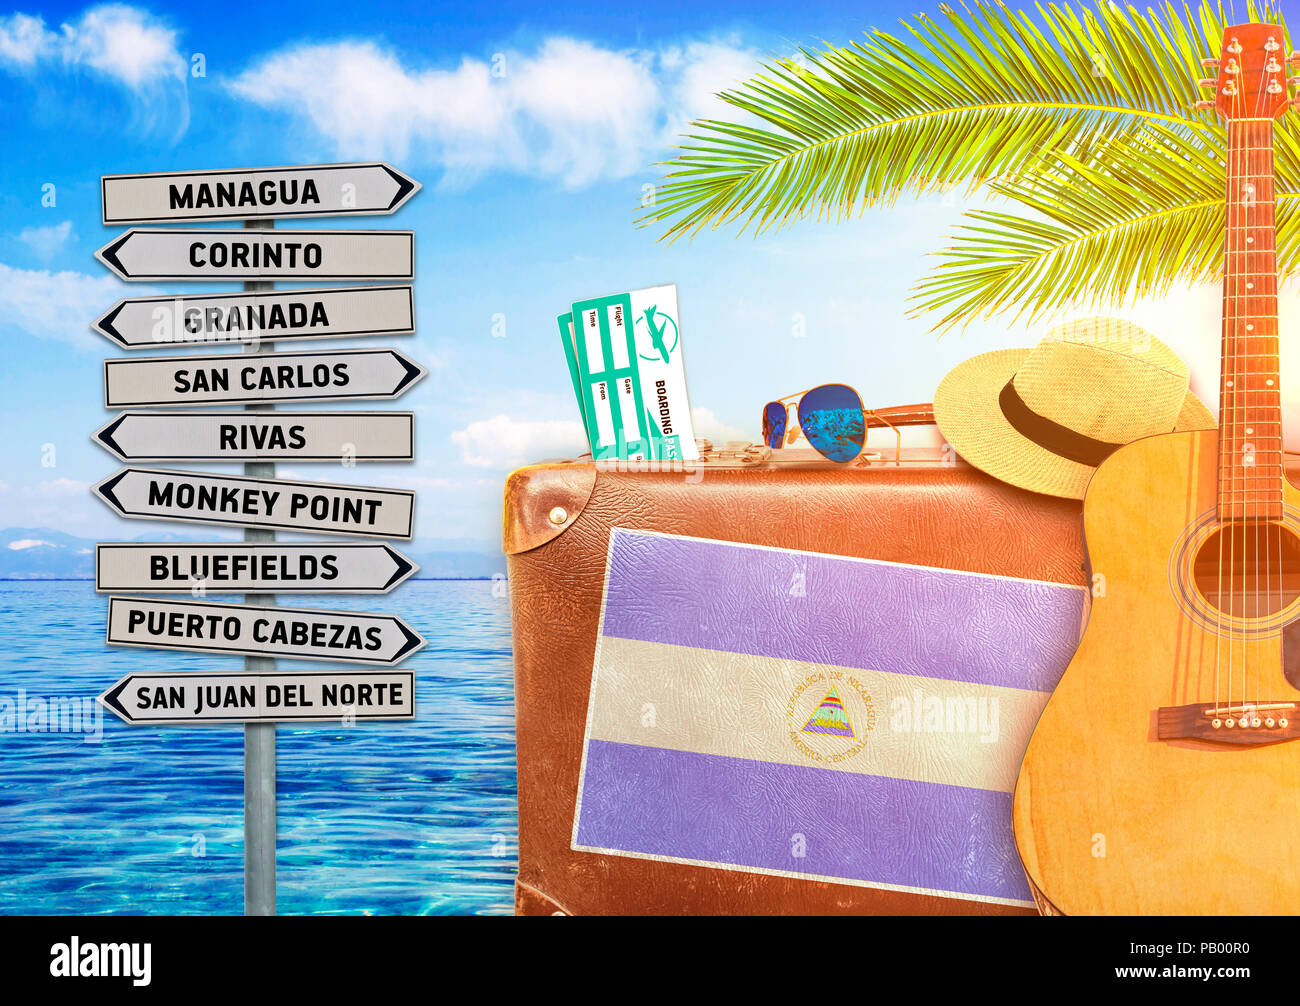 Concept of summer traveling with old suitcase and Nicaragua town sign Stock Photo